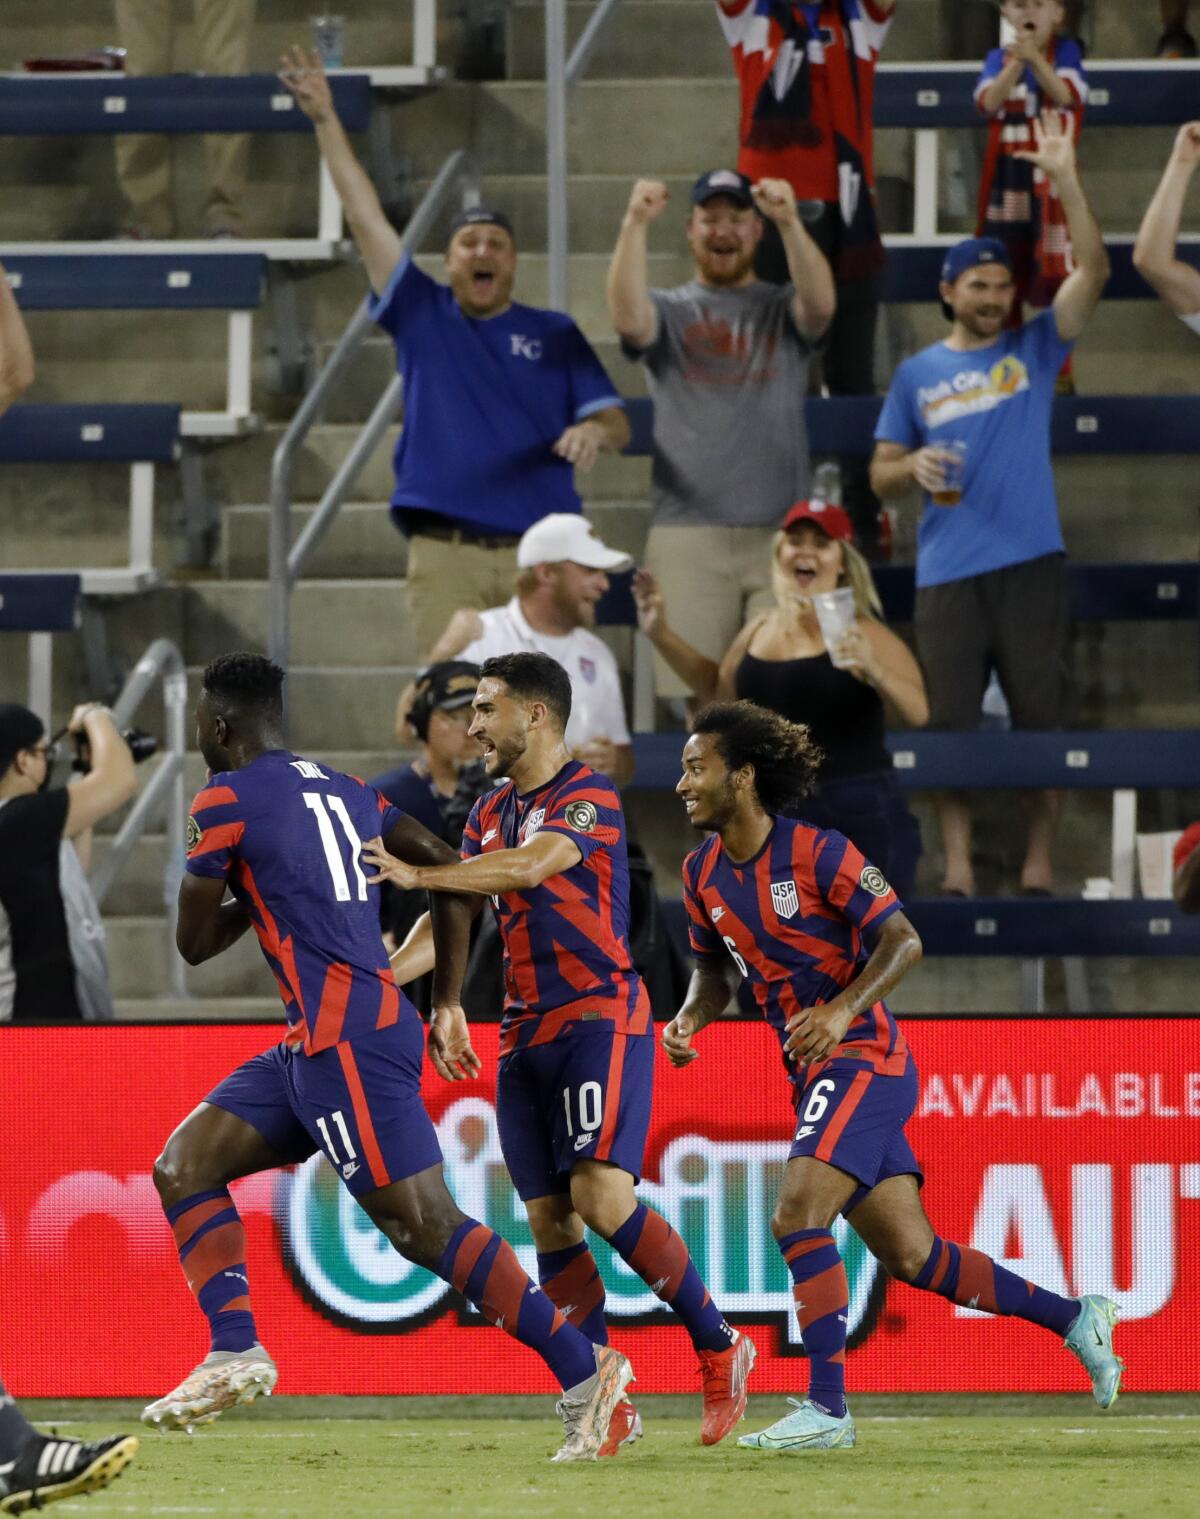 U.S. forward Daryl Dike (11) celebrates with Cristian Roldan (10) and Gianluca Busio (6) after scoring a goal in the first half of the team's CONCACAF Gold Cup soccer match against Martinique in Kansas City, Kan., Thursday, July 15, 2021. (AP Photo/Colin E. Braley)